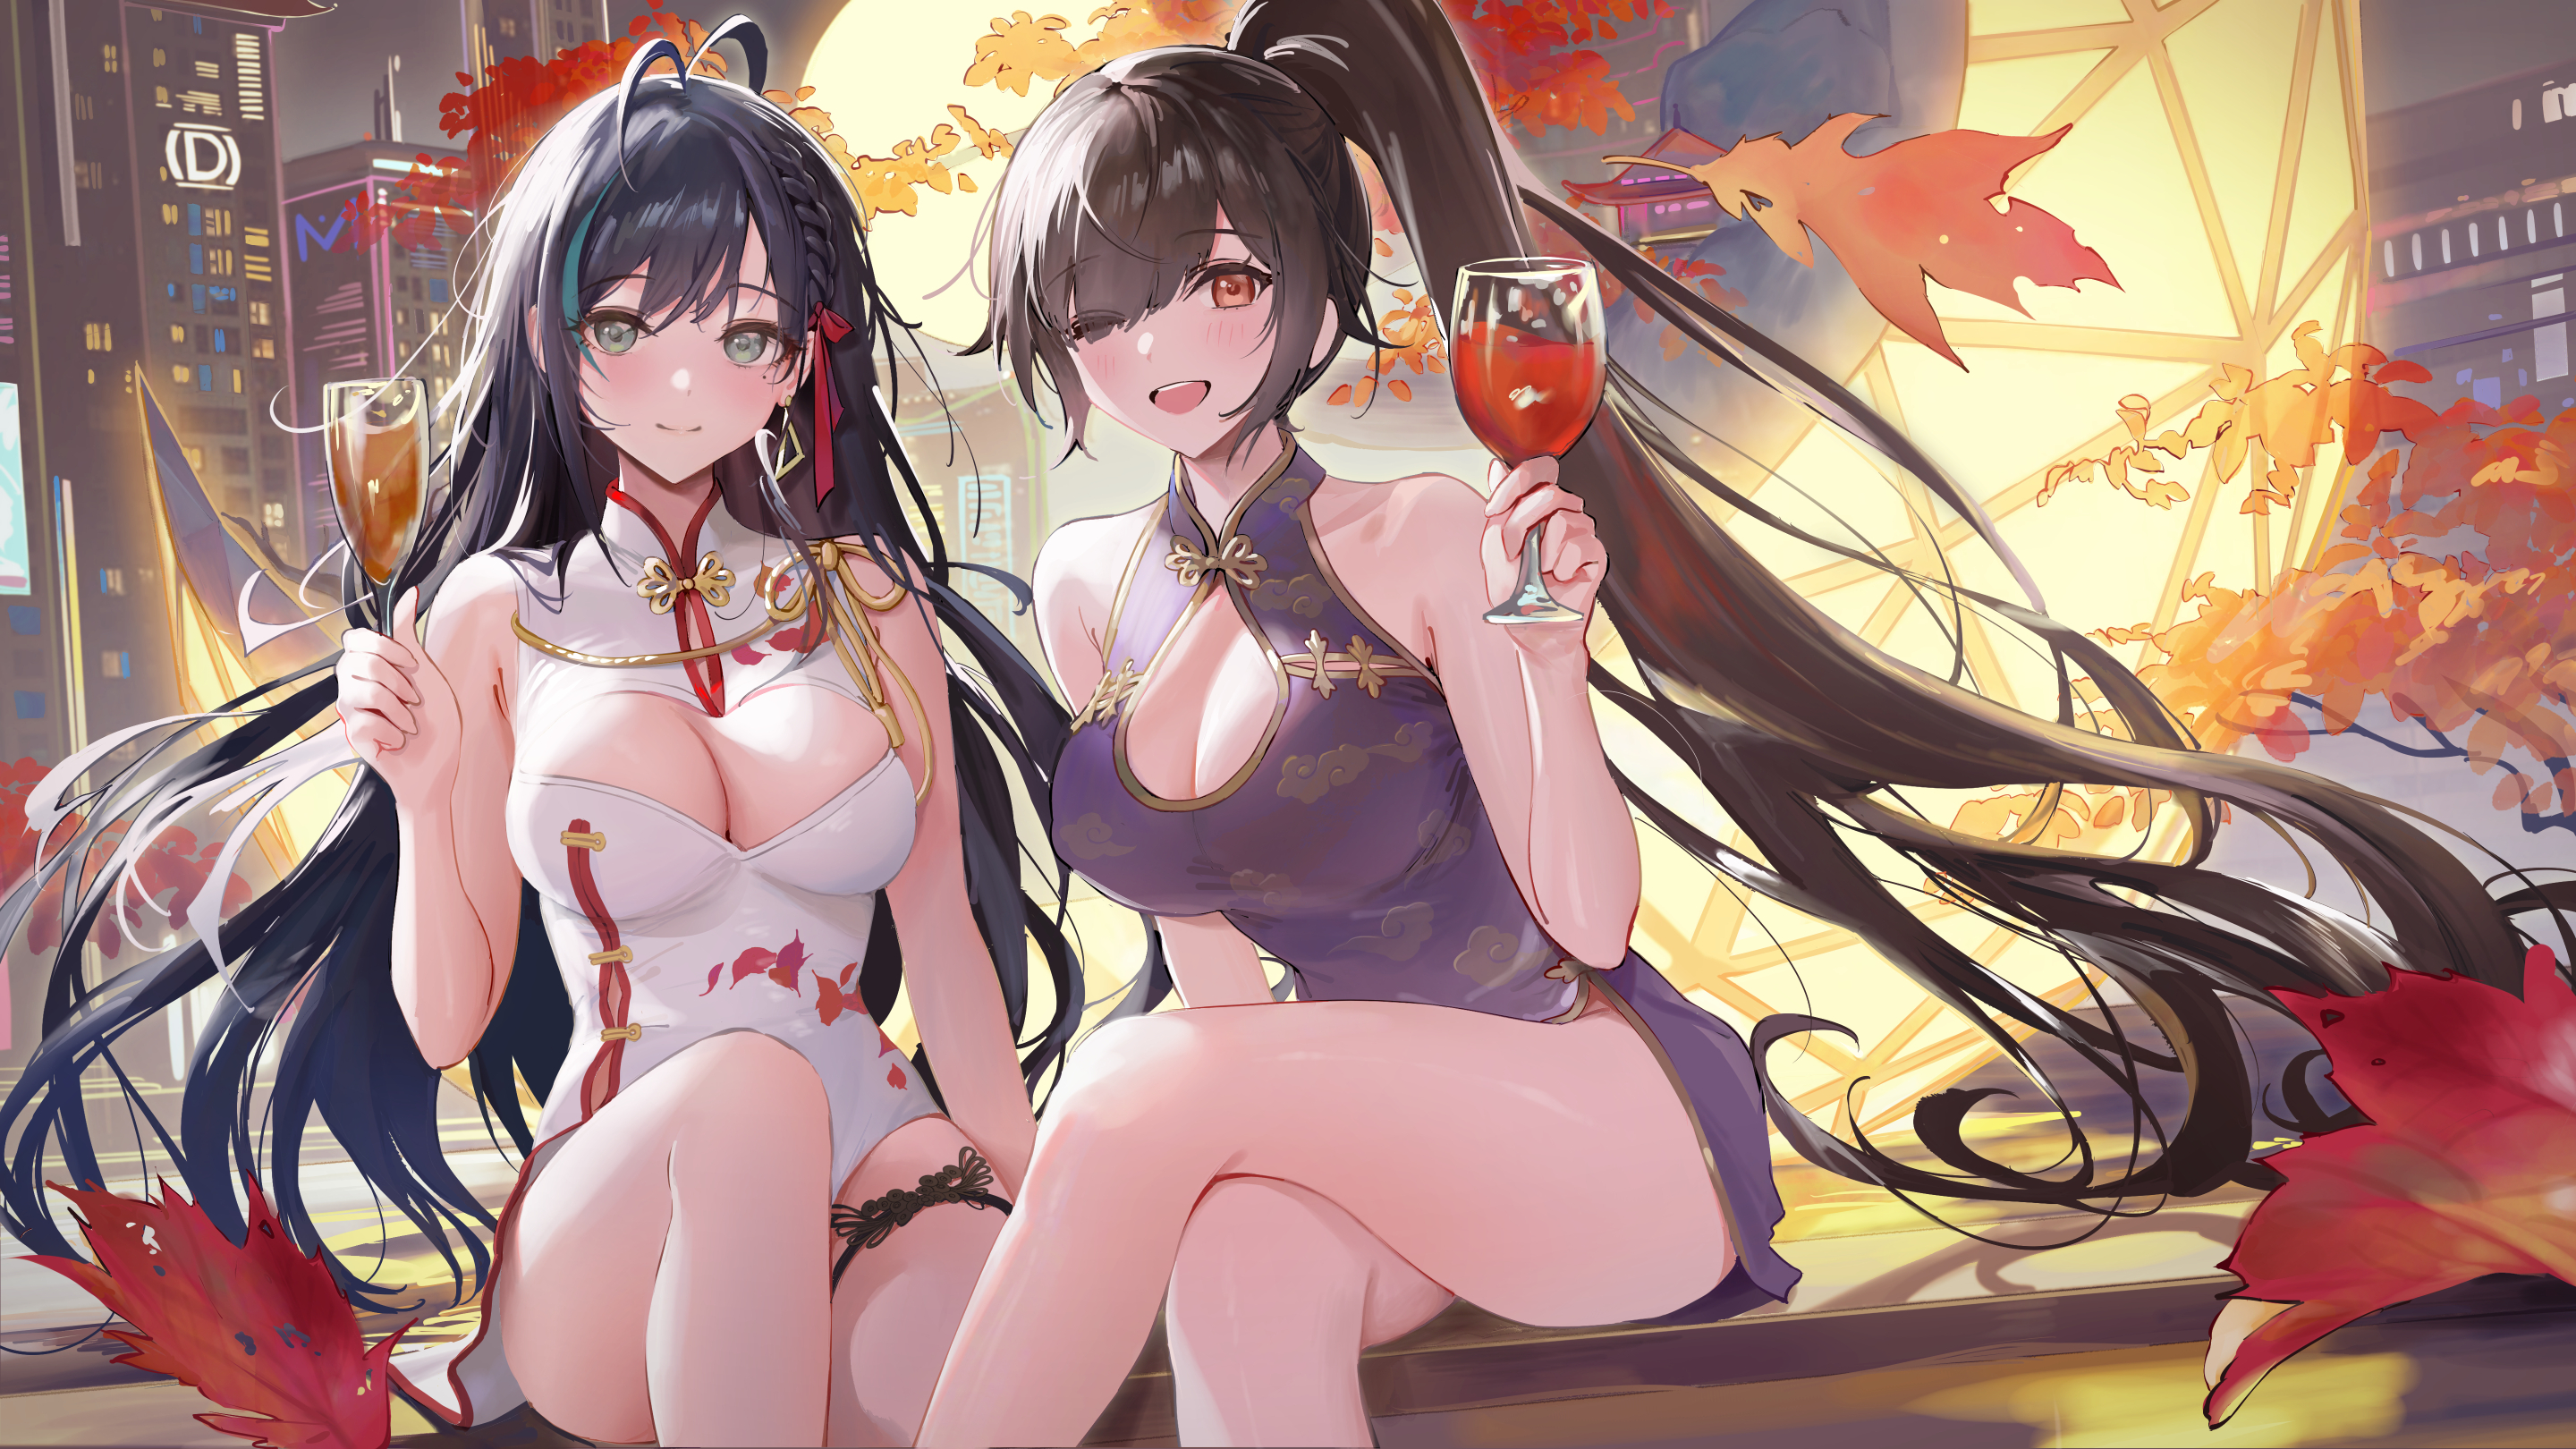 Anime 2880x1620 anime anime girls cleavage cleavage cutout Chinese dress legs crossed leaves one eye closed ponytail two women Tower of Fantasy Lin (Tower of Fantasy)